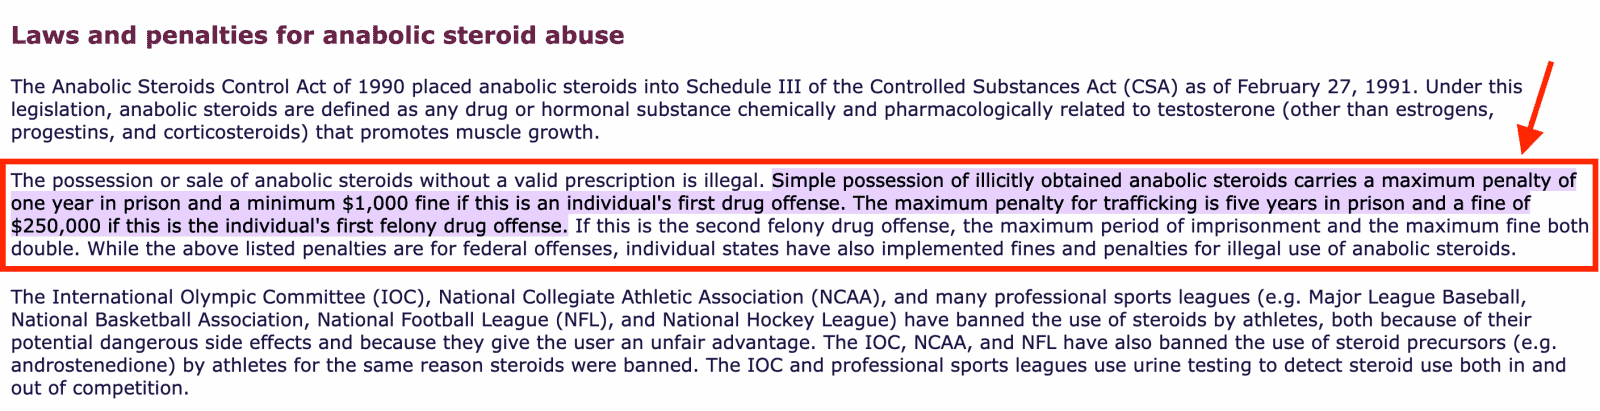 Anabolic steroids law and penalties